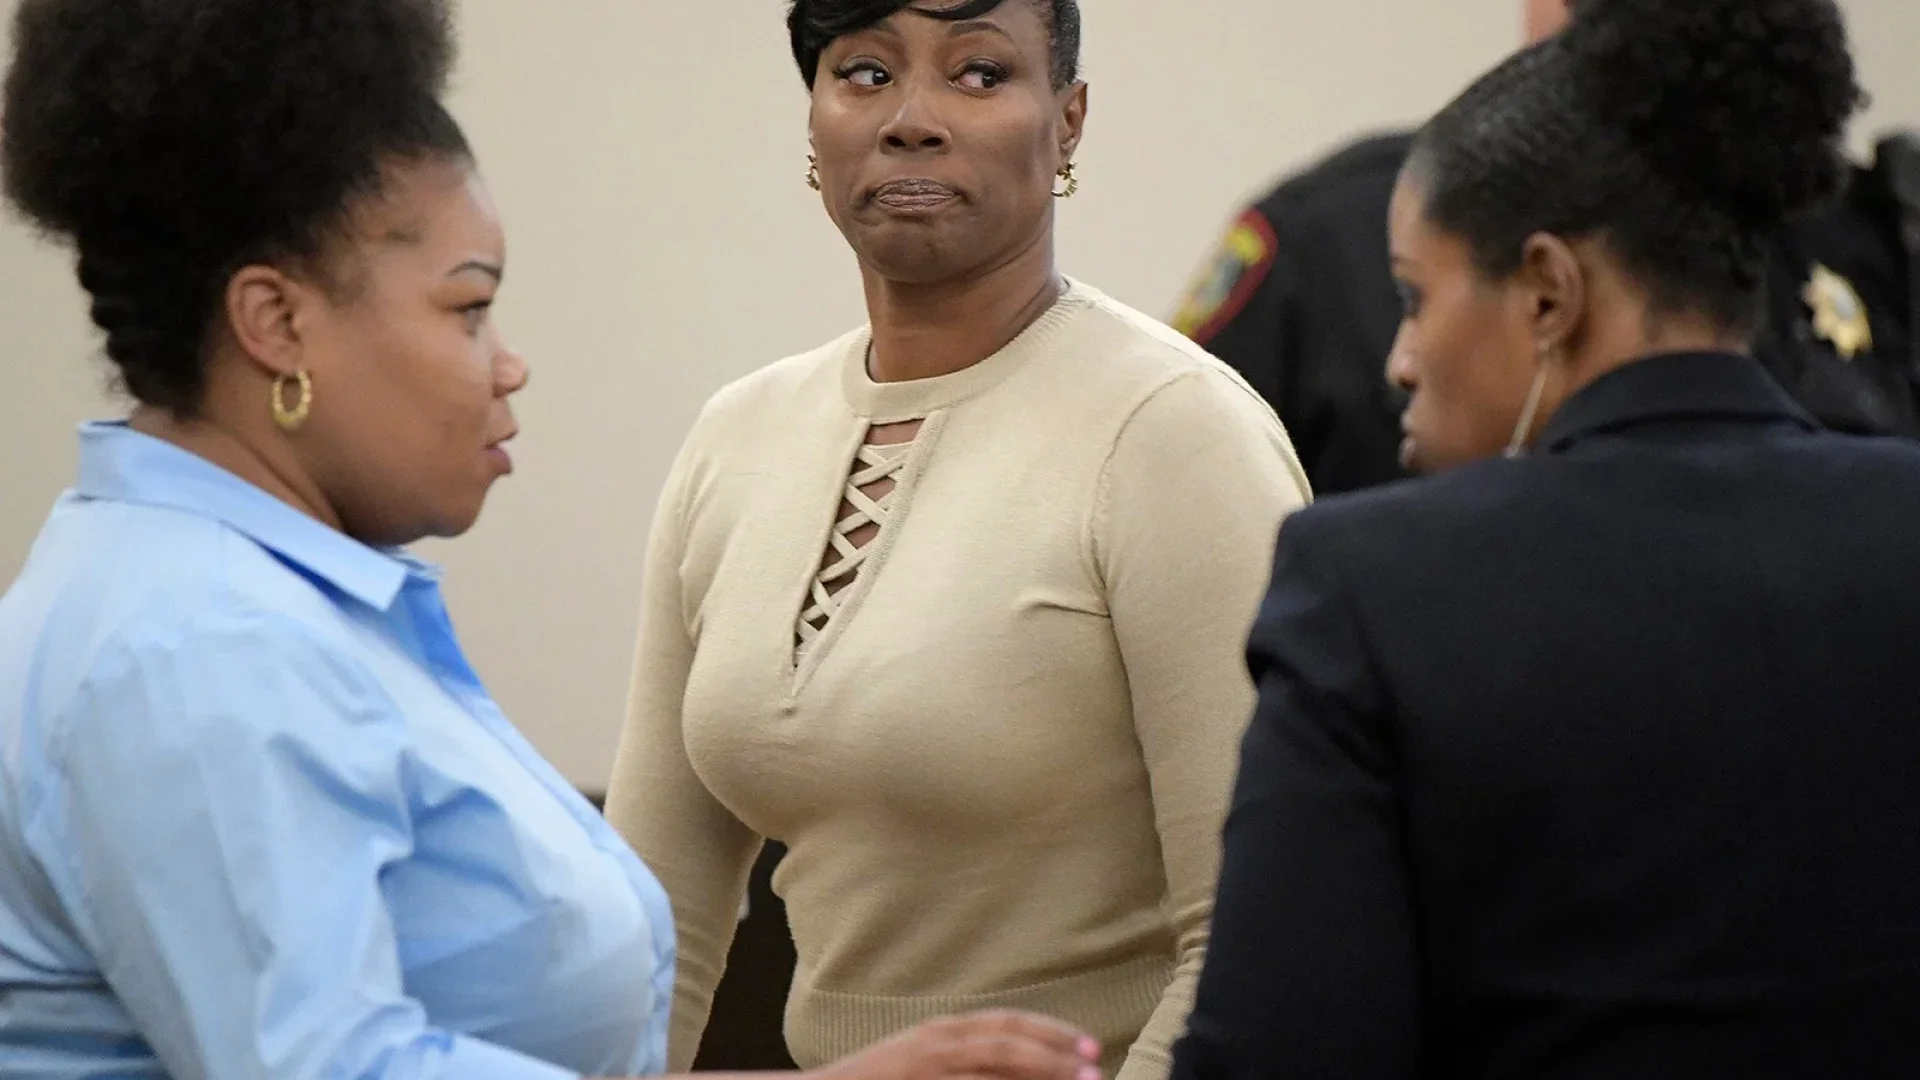 Black Mother Who Faced Five Years In Prison For Illegal Voting Has Conviction Overturned